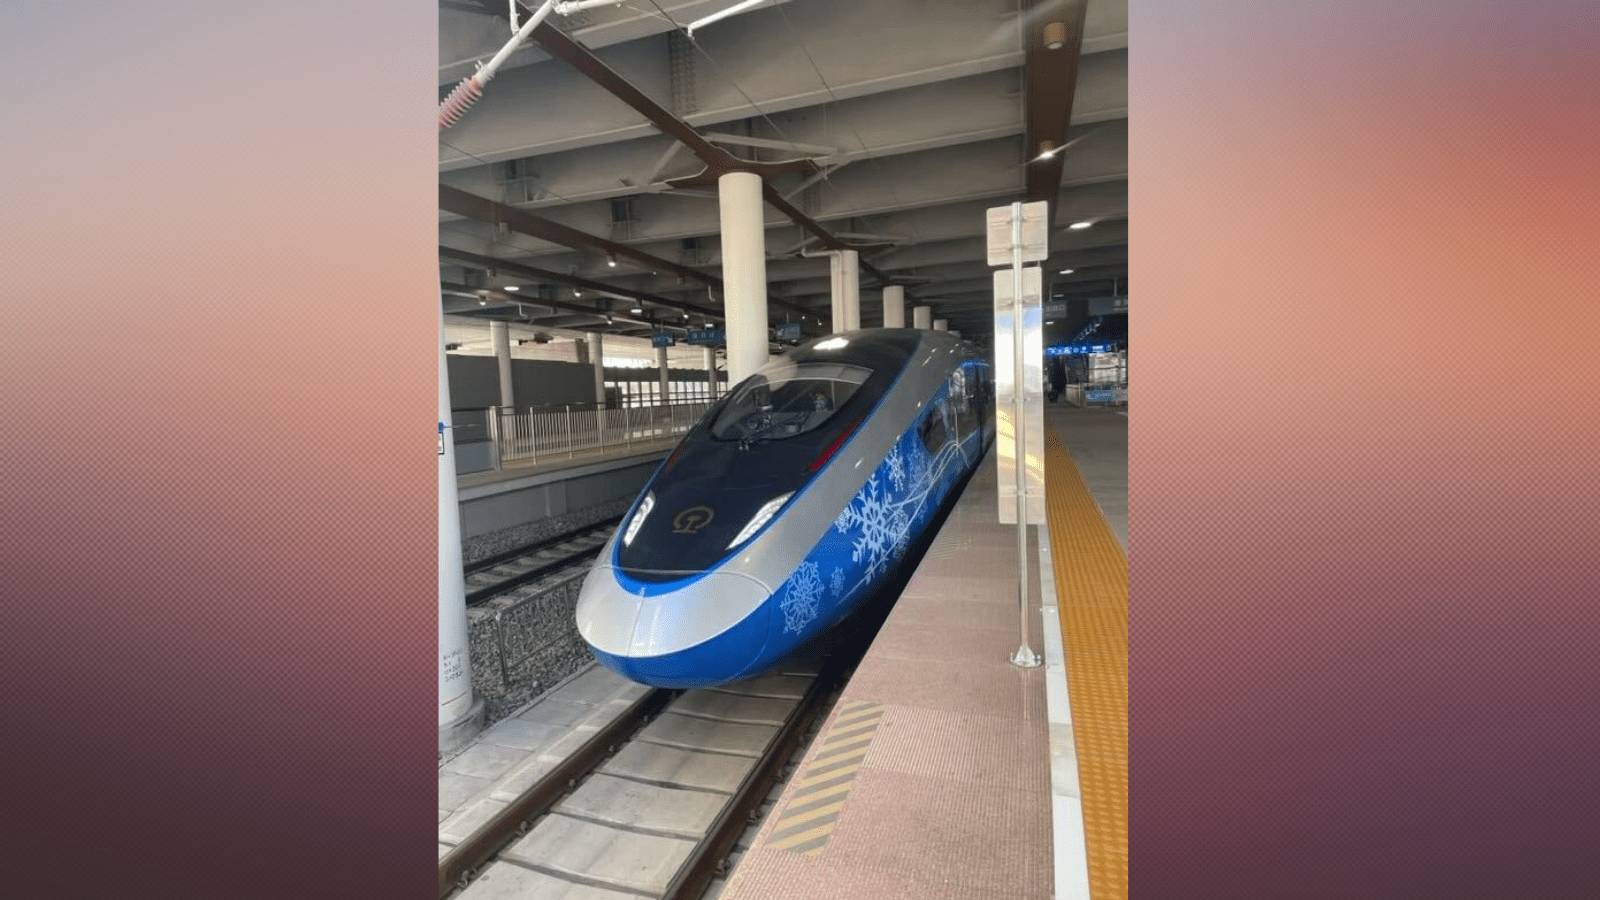 Hop on China's Bullet Train for the 2022 Beijing Winter Olympics